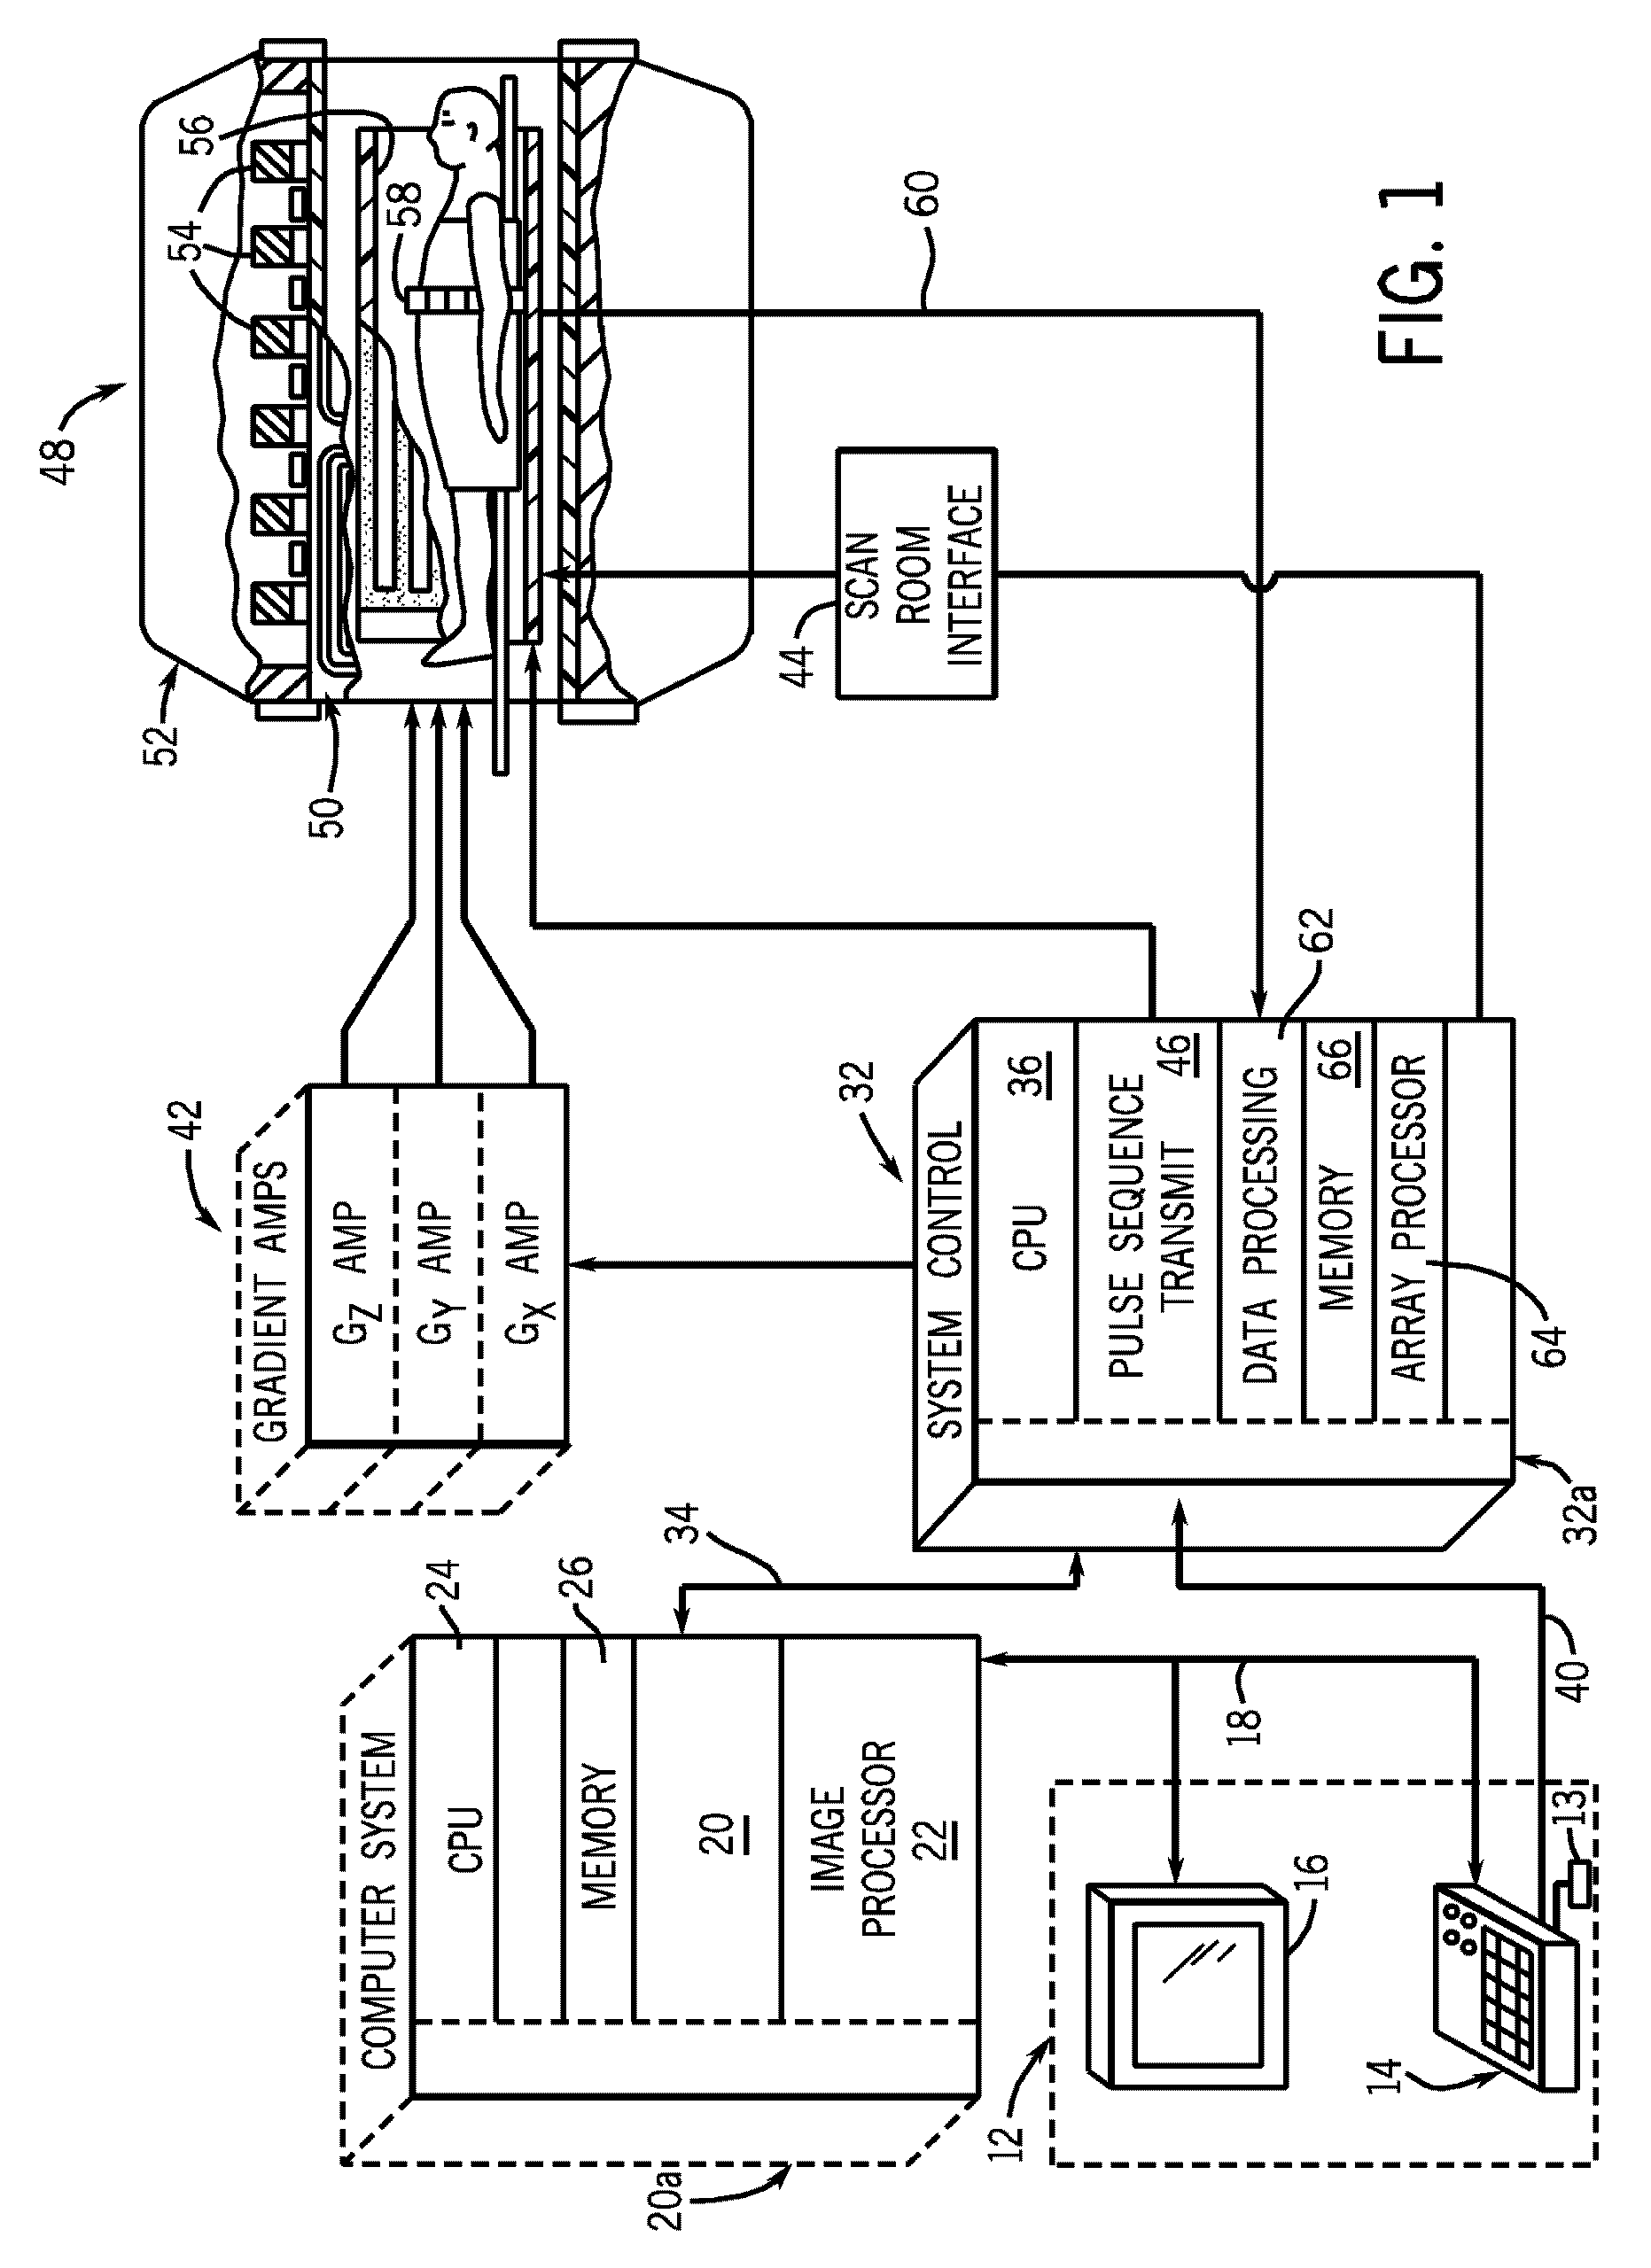 System and method for fast MR coil sensitivity mapping